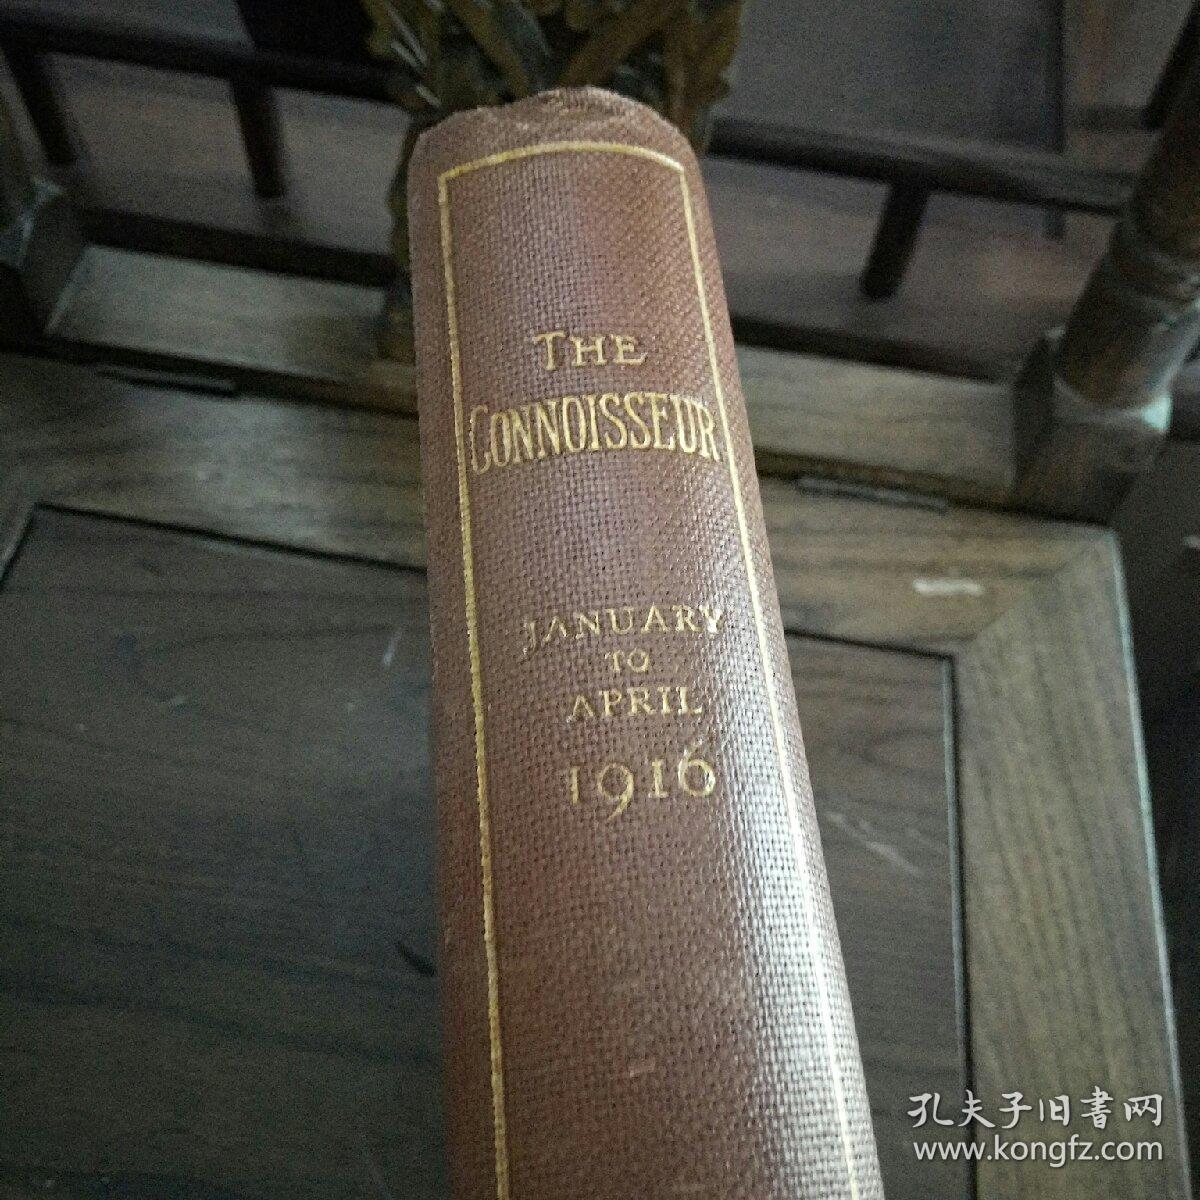 The connoisseur : an  illustrated magazine for collectors January-April ,1916 鉴赏家 1916年 一月-四月